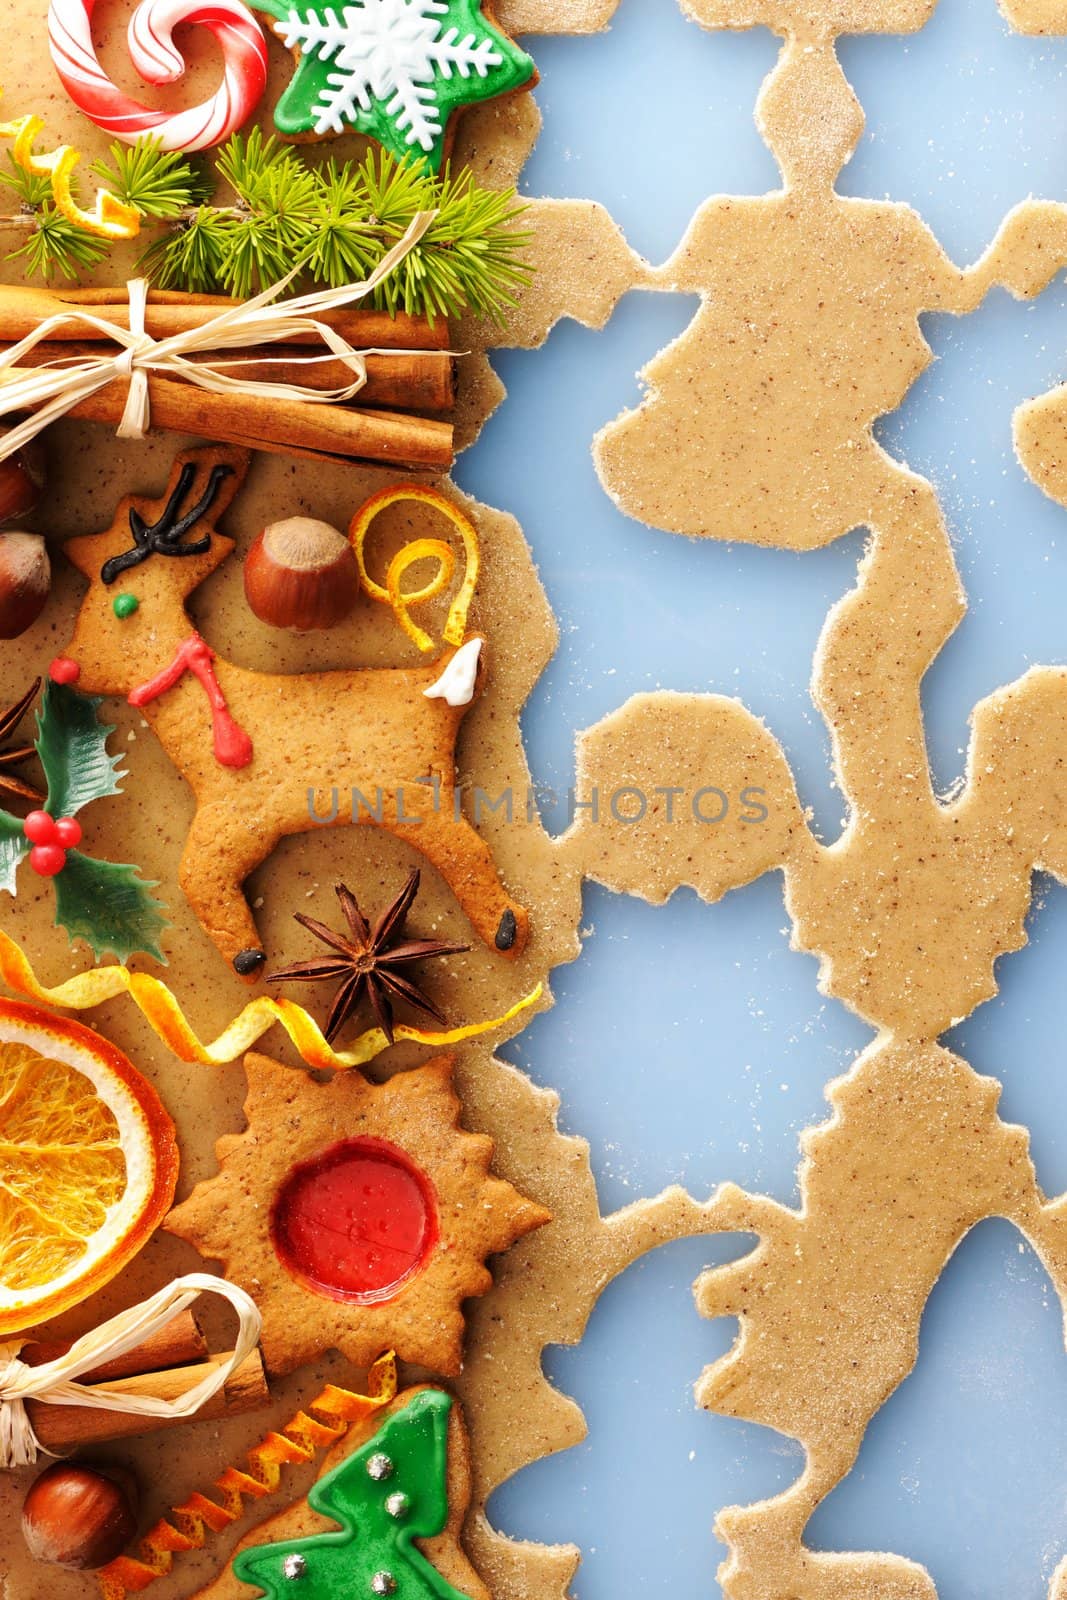 Christmas spices and cookies over gingerbread dough by haveseen